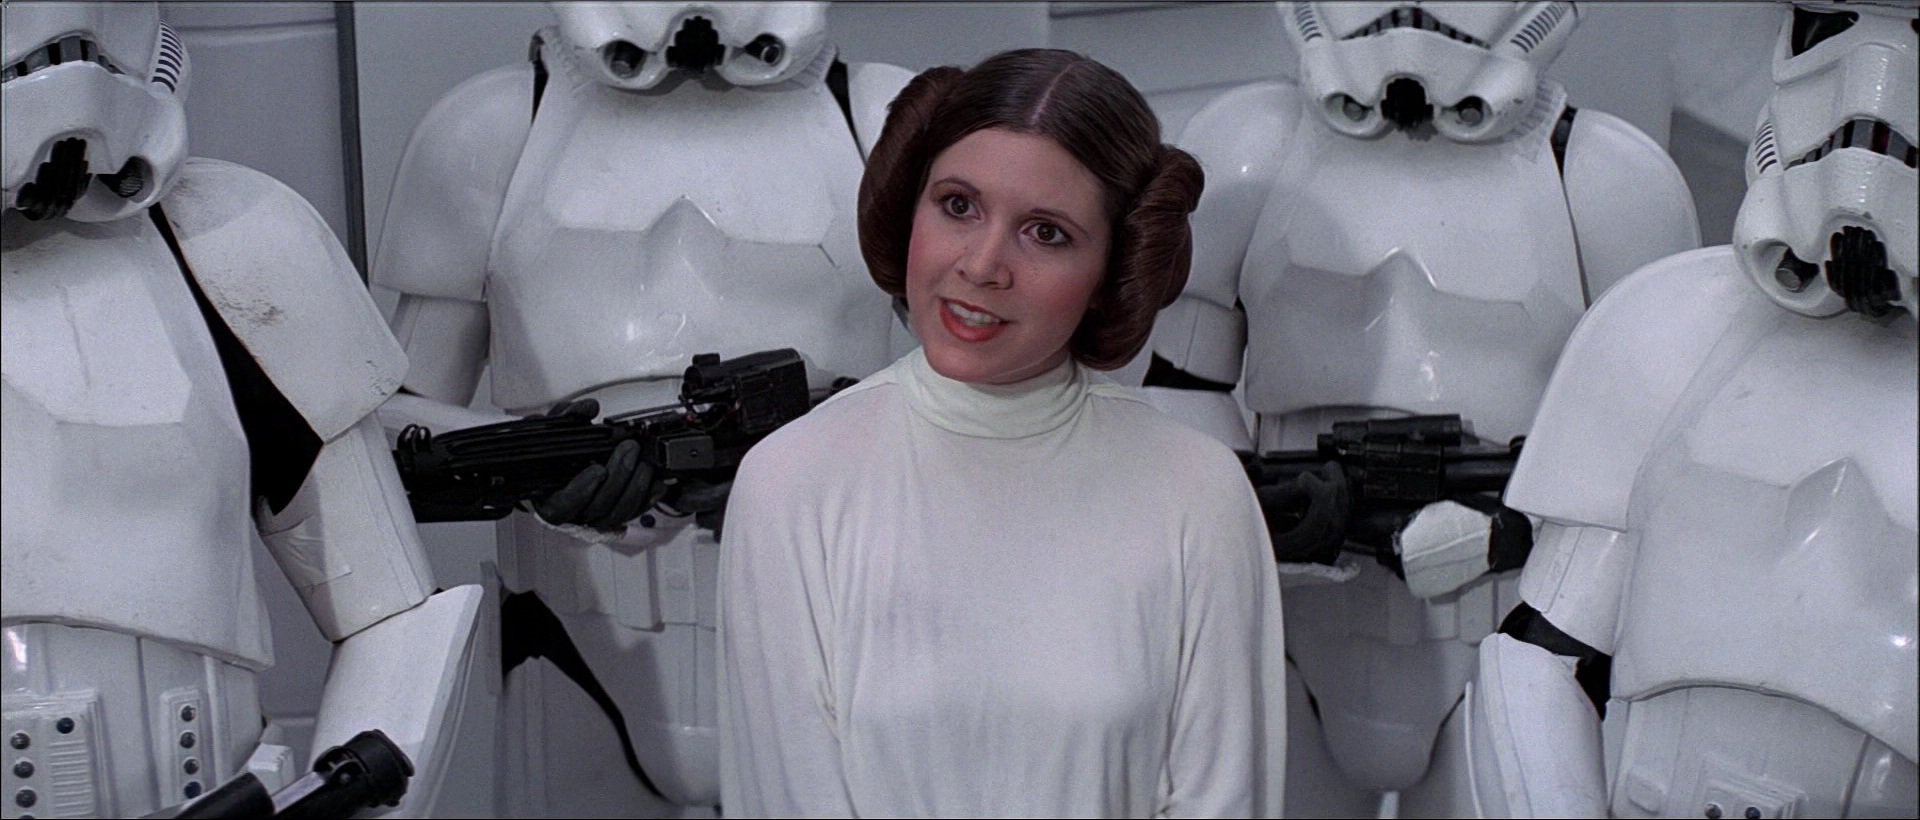 24 Carrie Fisher Photos - To Our Beloved Princess Leia